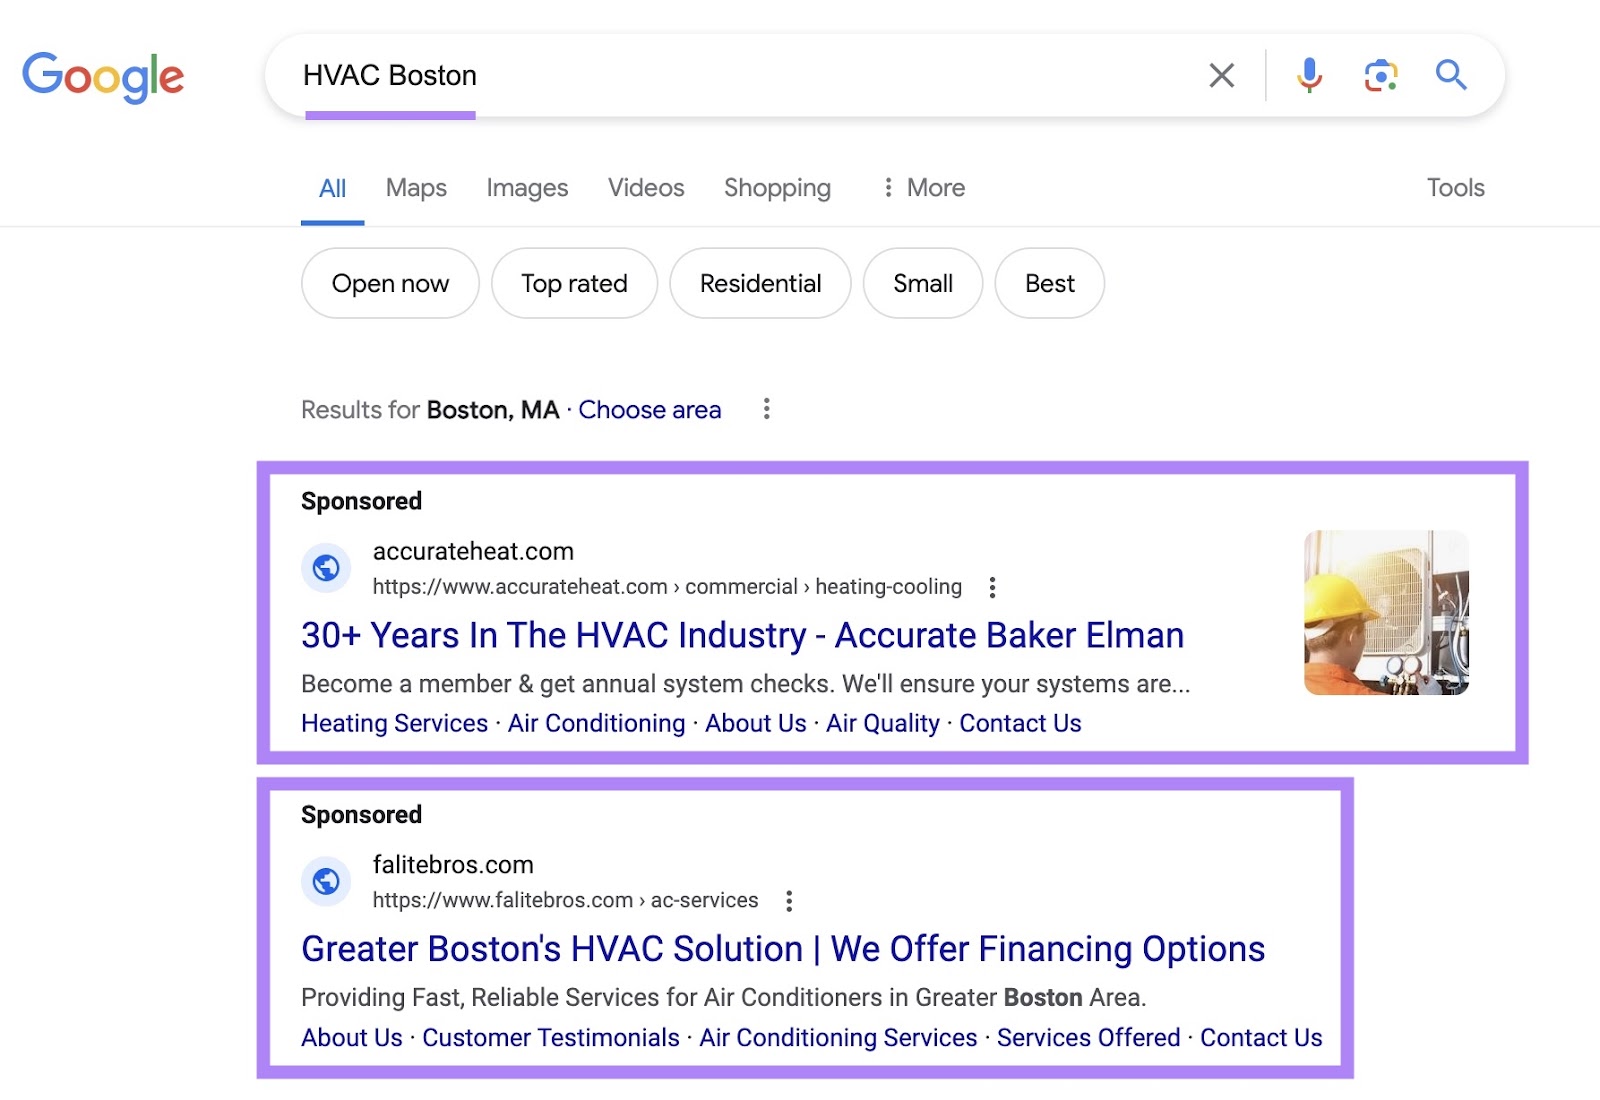 Google SERP for the local search "HVAC Boston" showing two sponsored listings appearing on top.